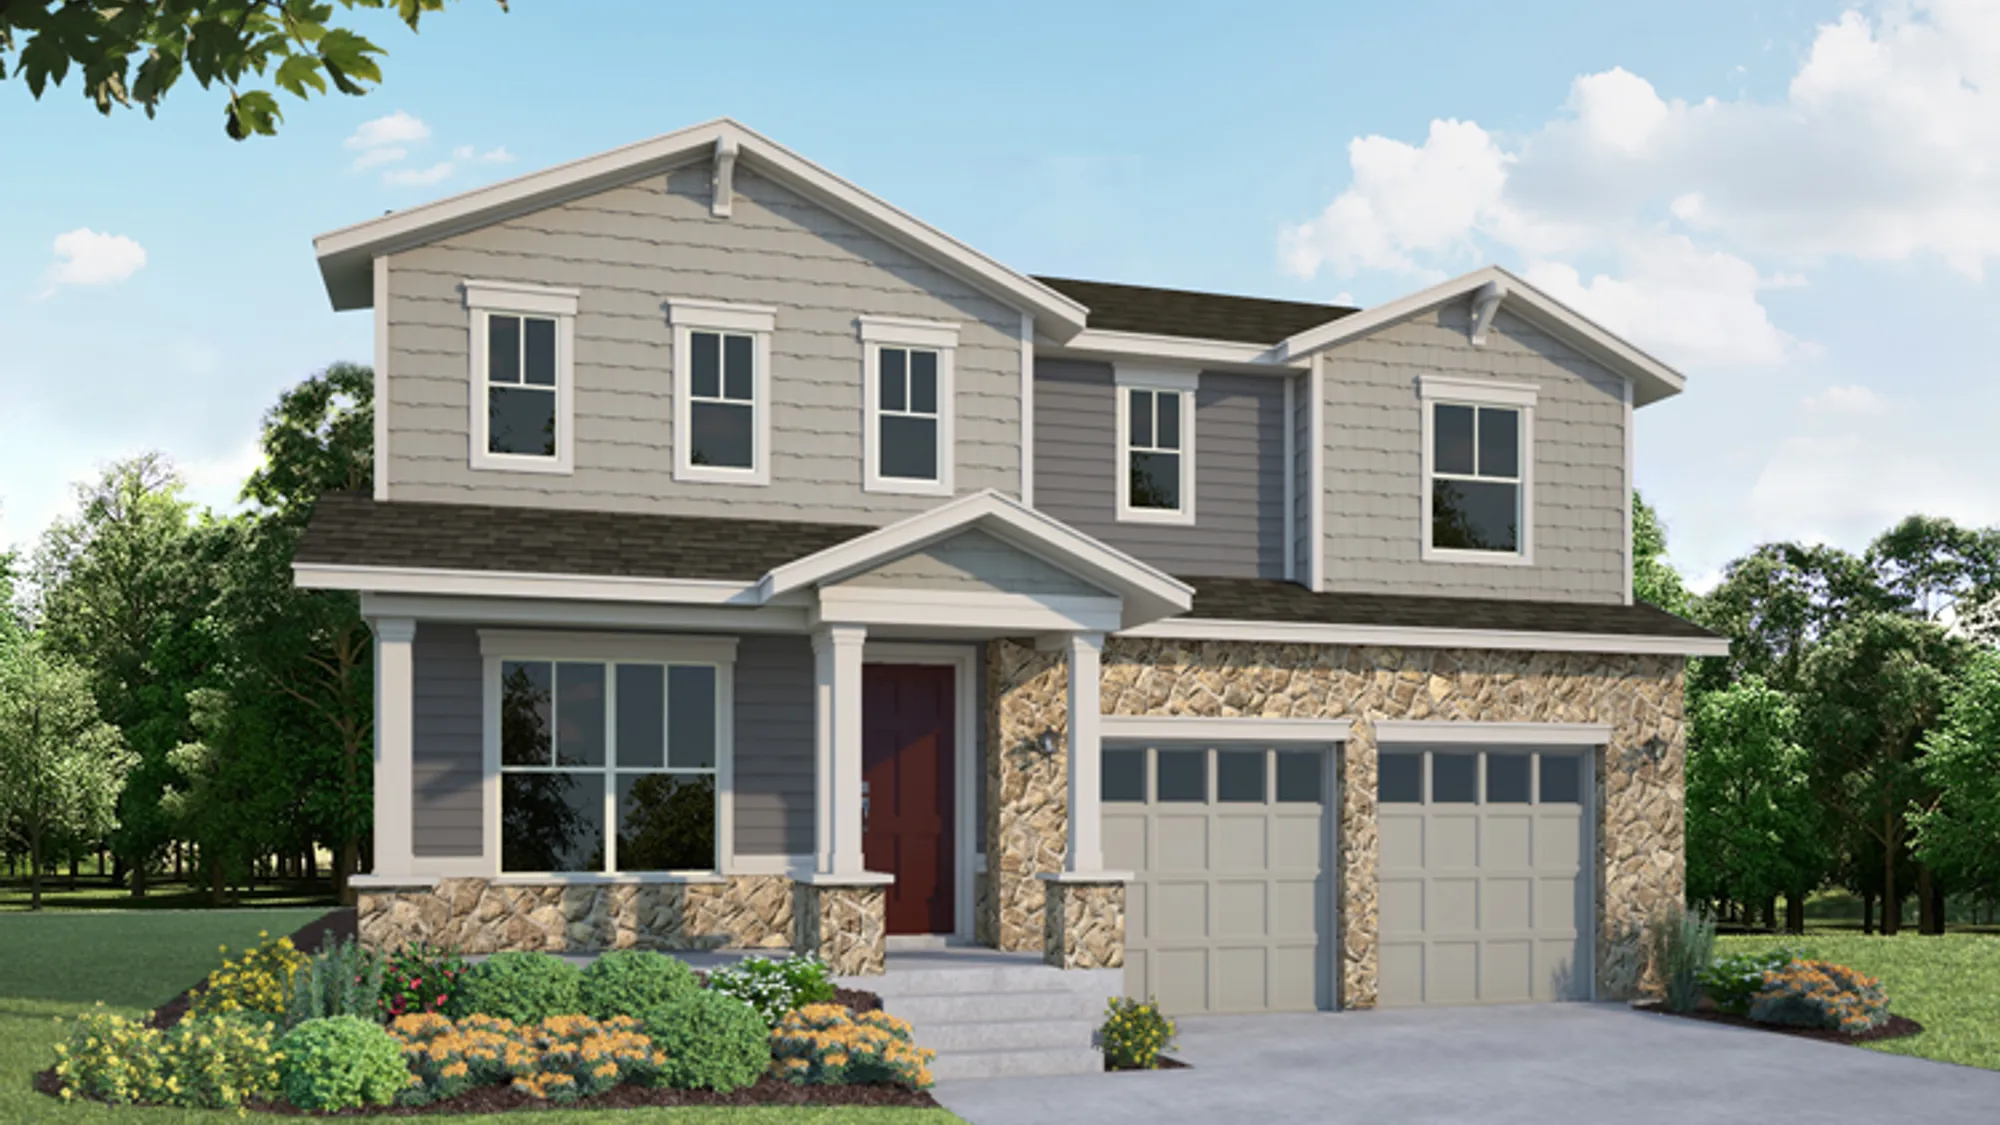 Plan C405 Elevation A with Manufactured Stone - SH